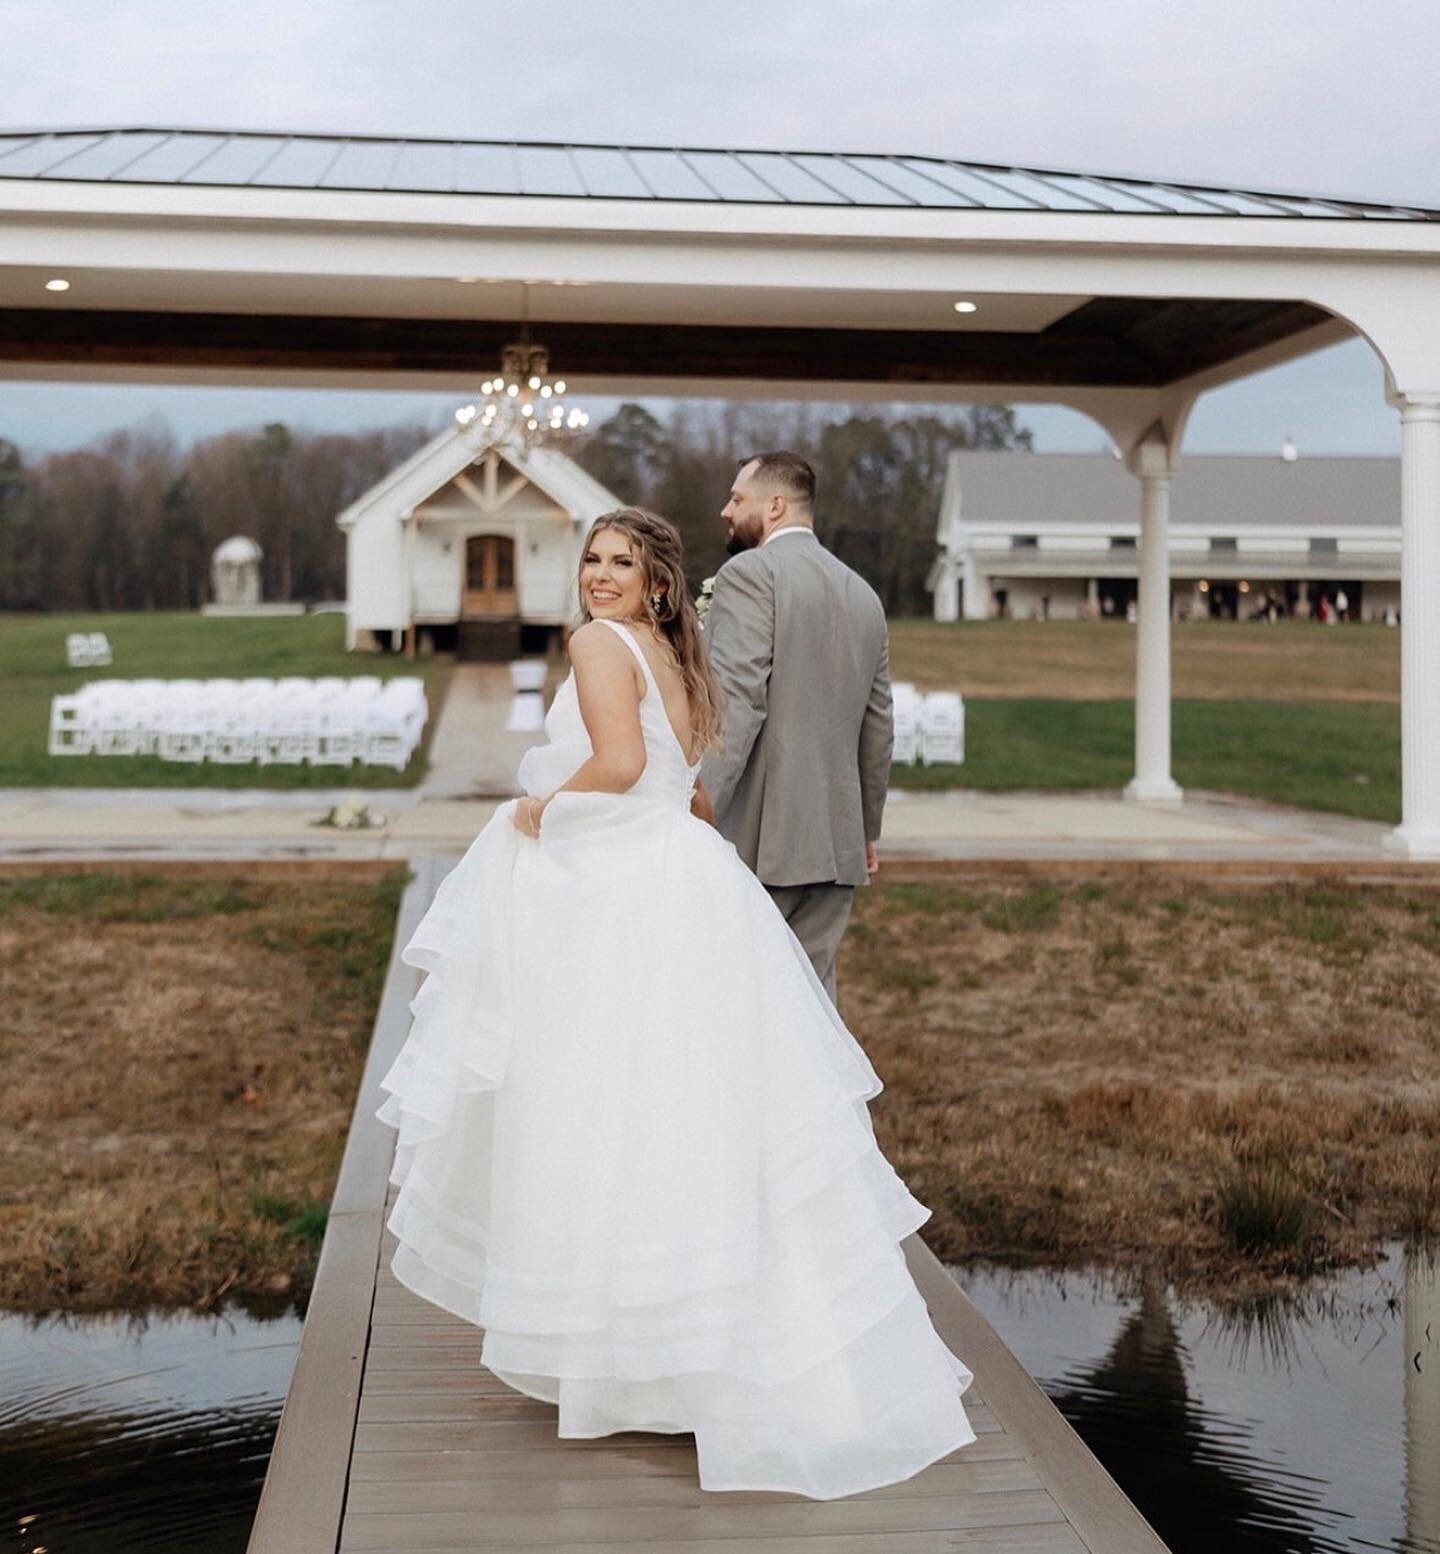 Introducing Mr. &amp; Mrs. Woods! Caitlyn and Austin had a gorgeous wedding at the gazebo followed by a reception in the barn! Photographer: @desireeashleyphotography #whiteoakmanorweddings #virginiaweddings #barnvenue #outdoorweddings #virginiaweddi